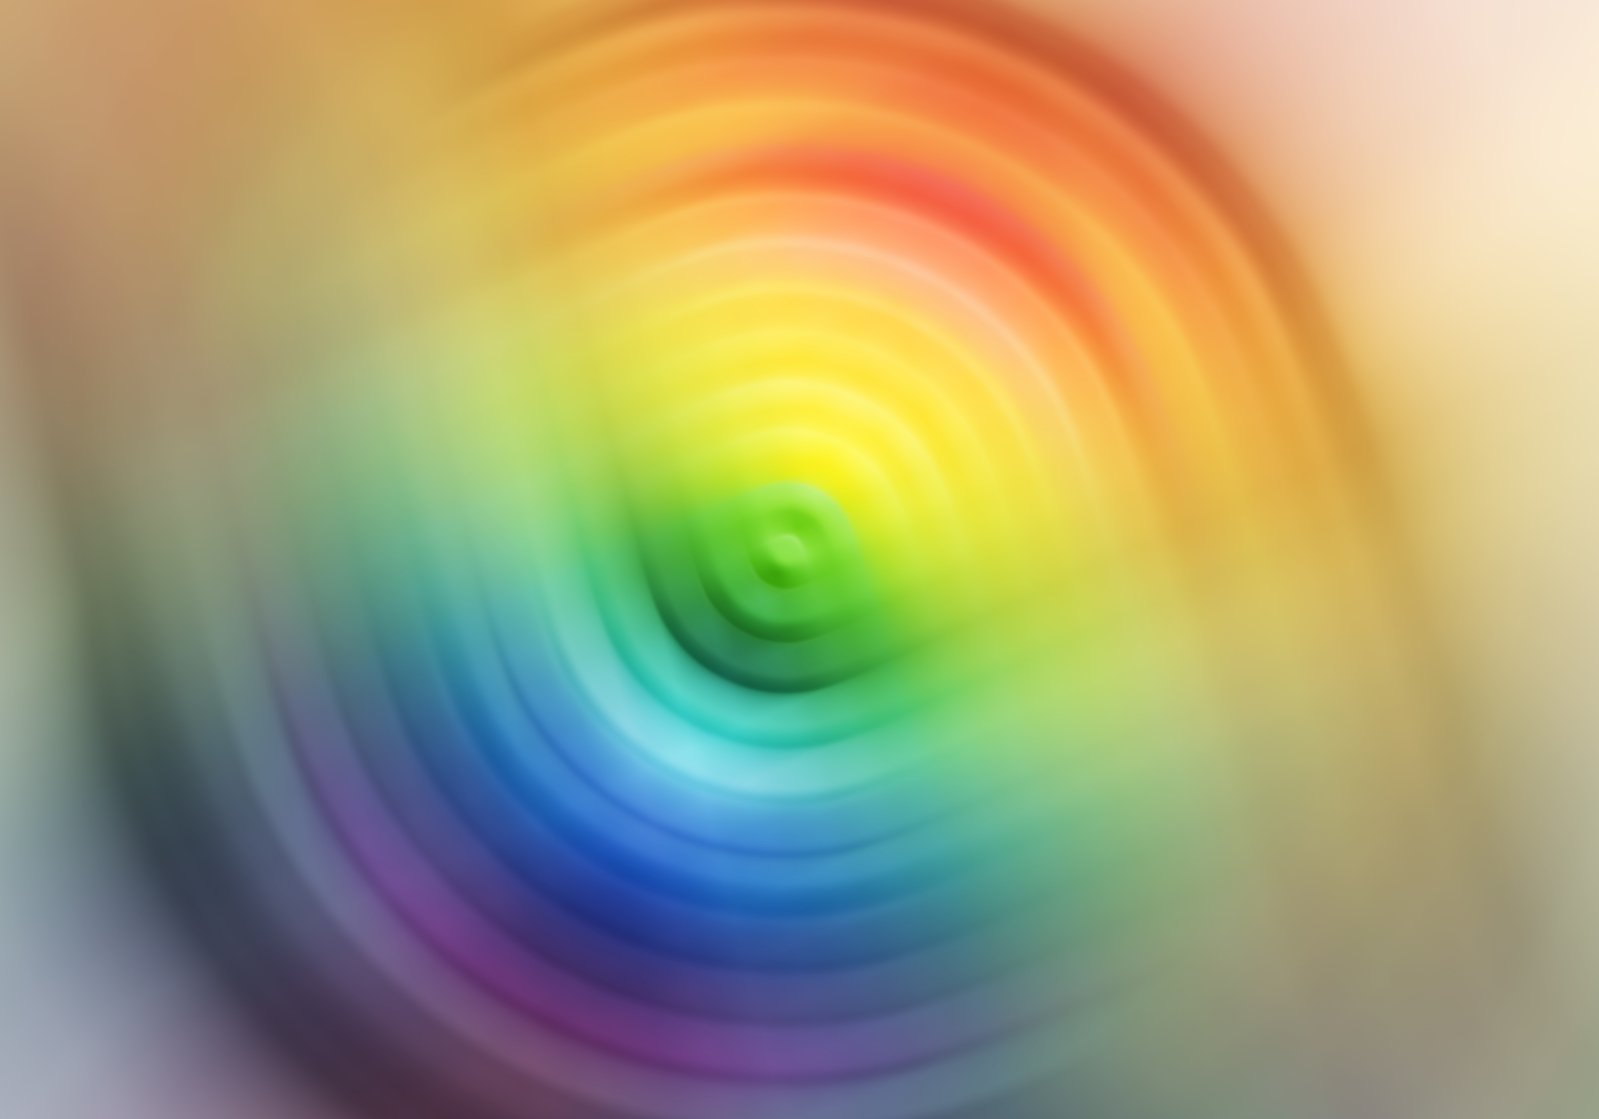 a po of a colorful circular object with a white background